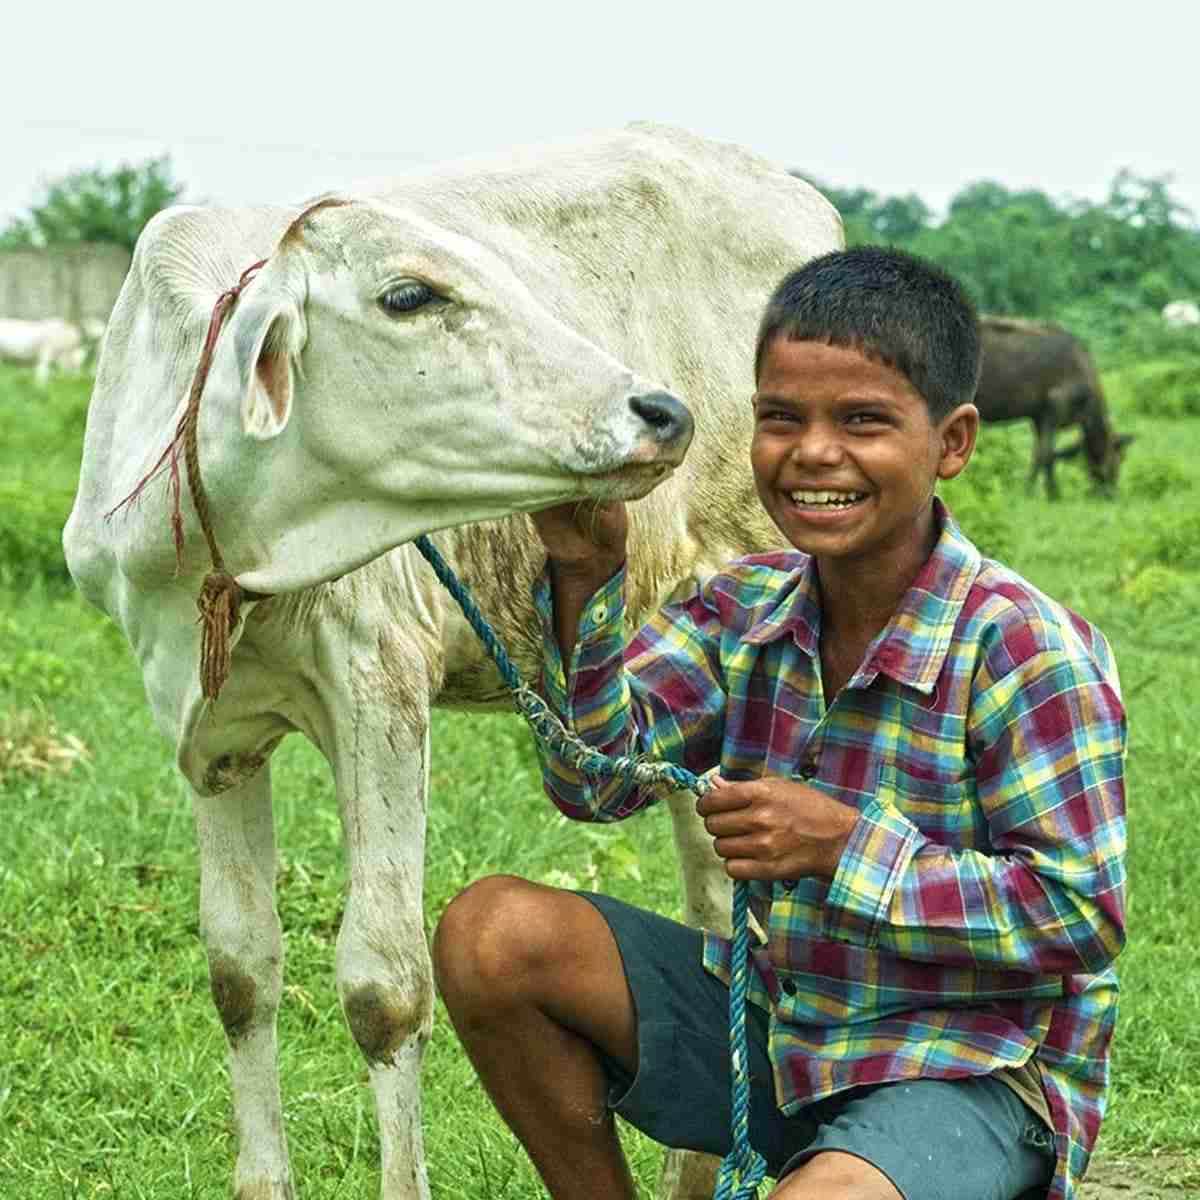 An income generating cow brings a smile to a young boy